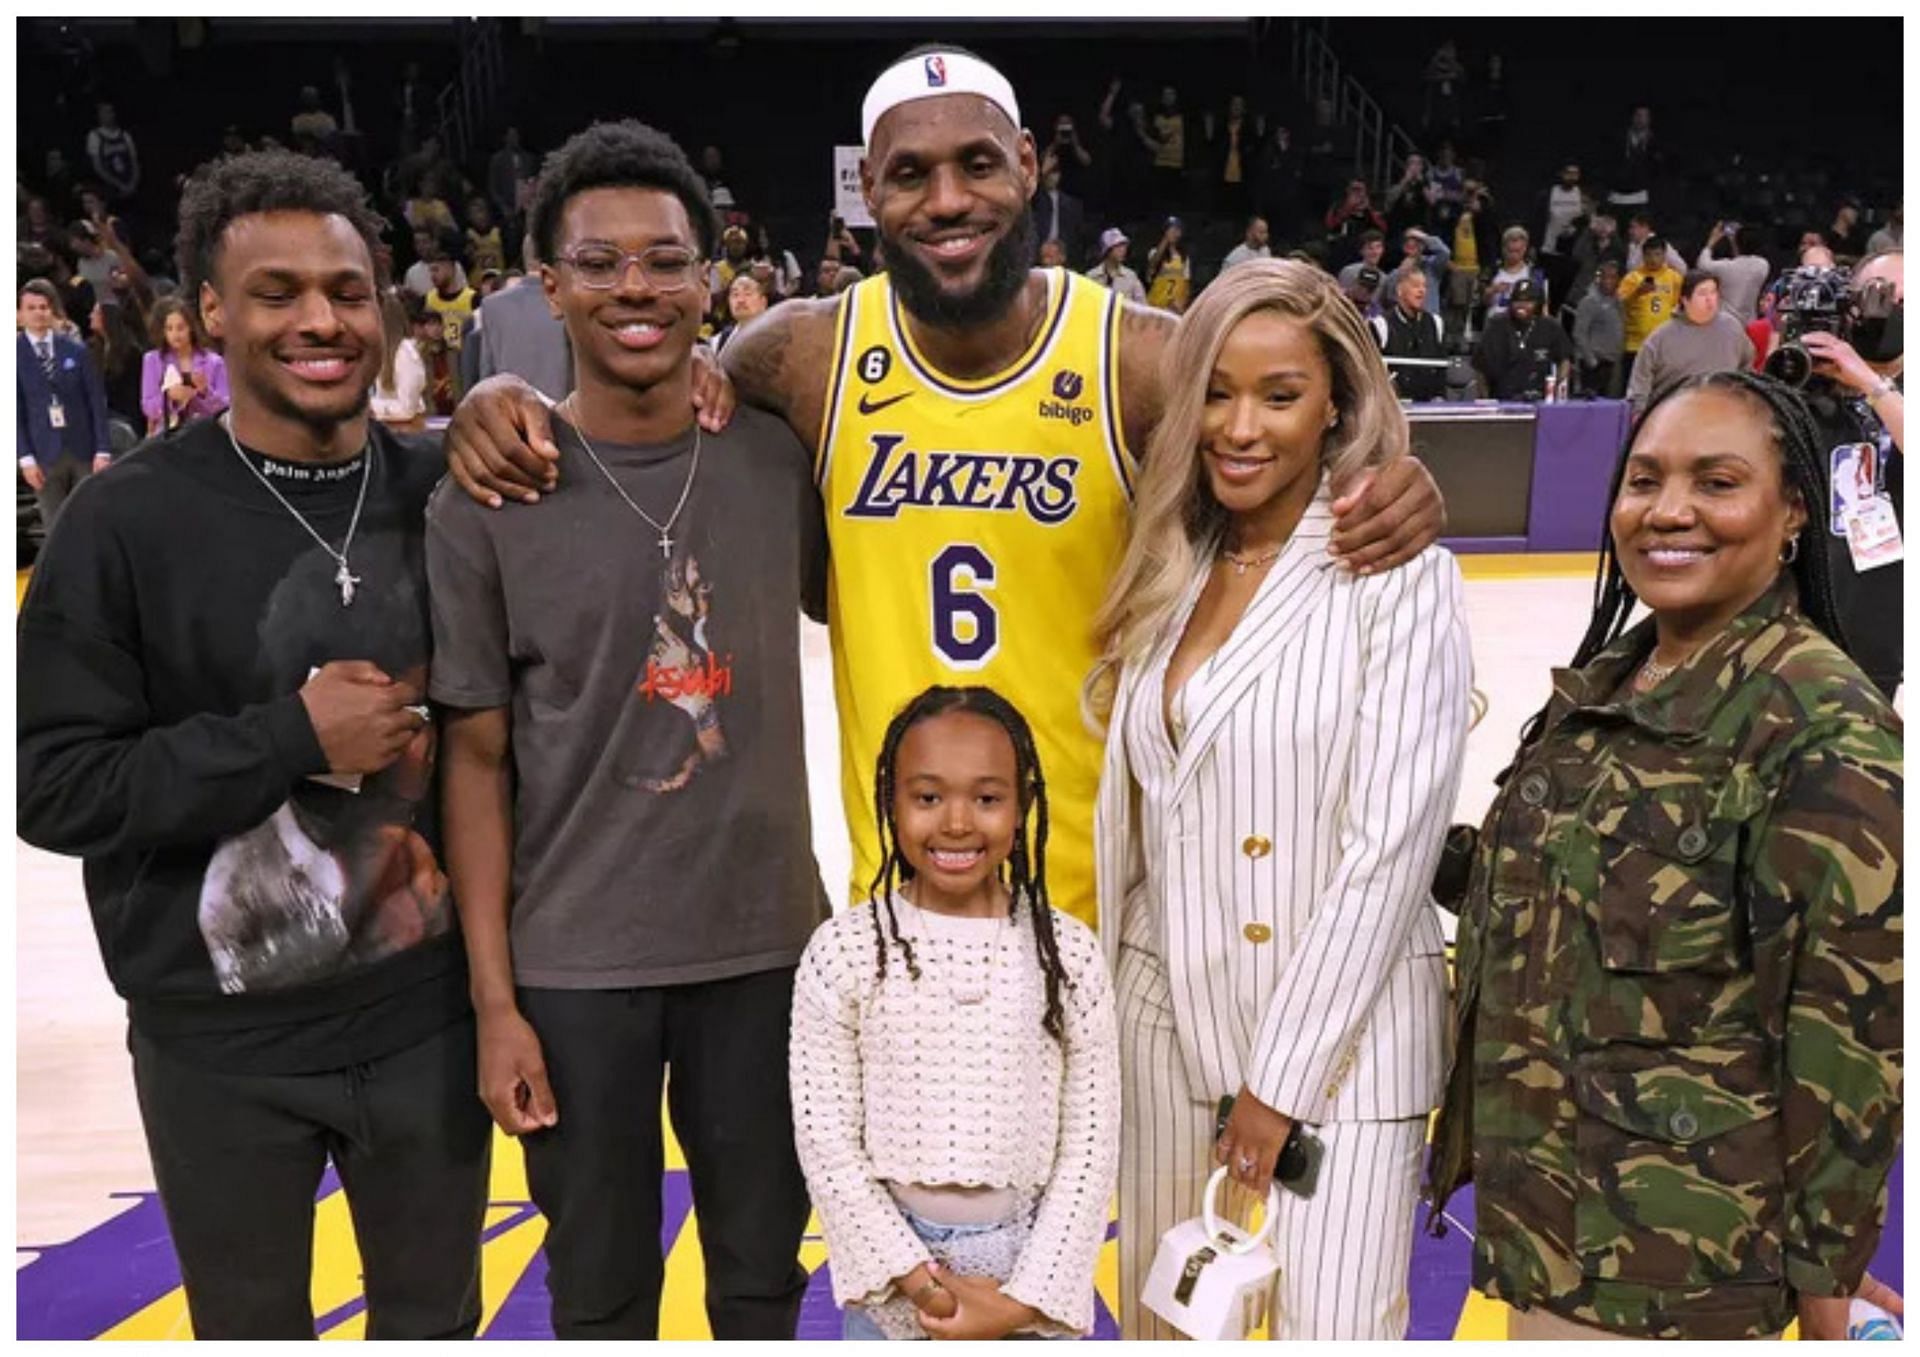 LeBron James and his family at Crypto.com Arena in Los Angeles